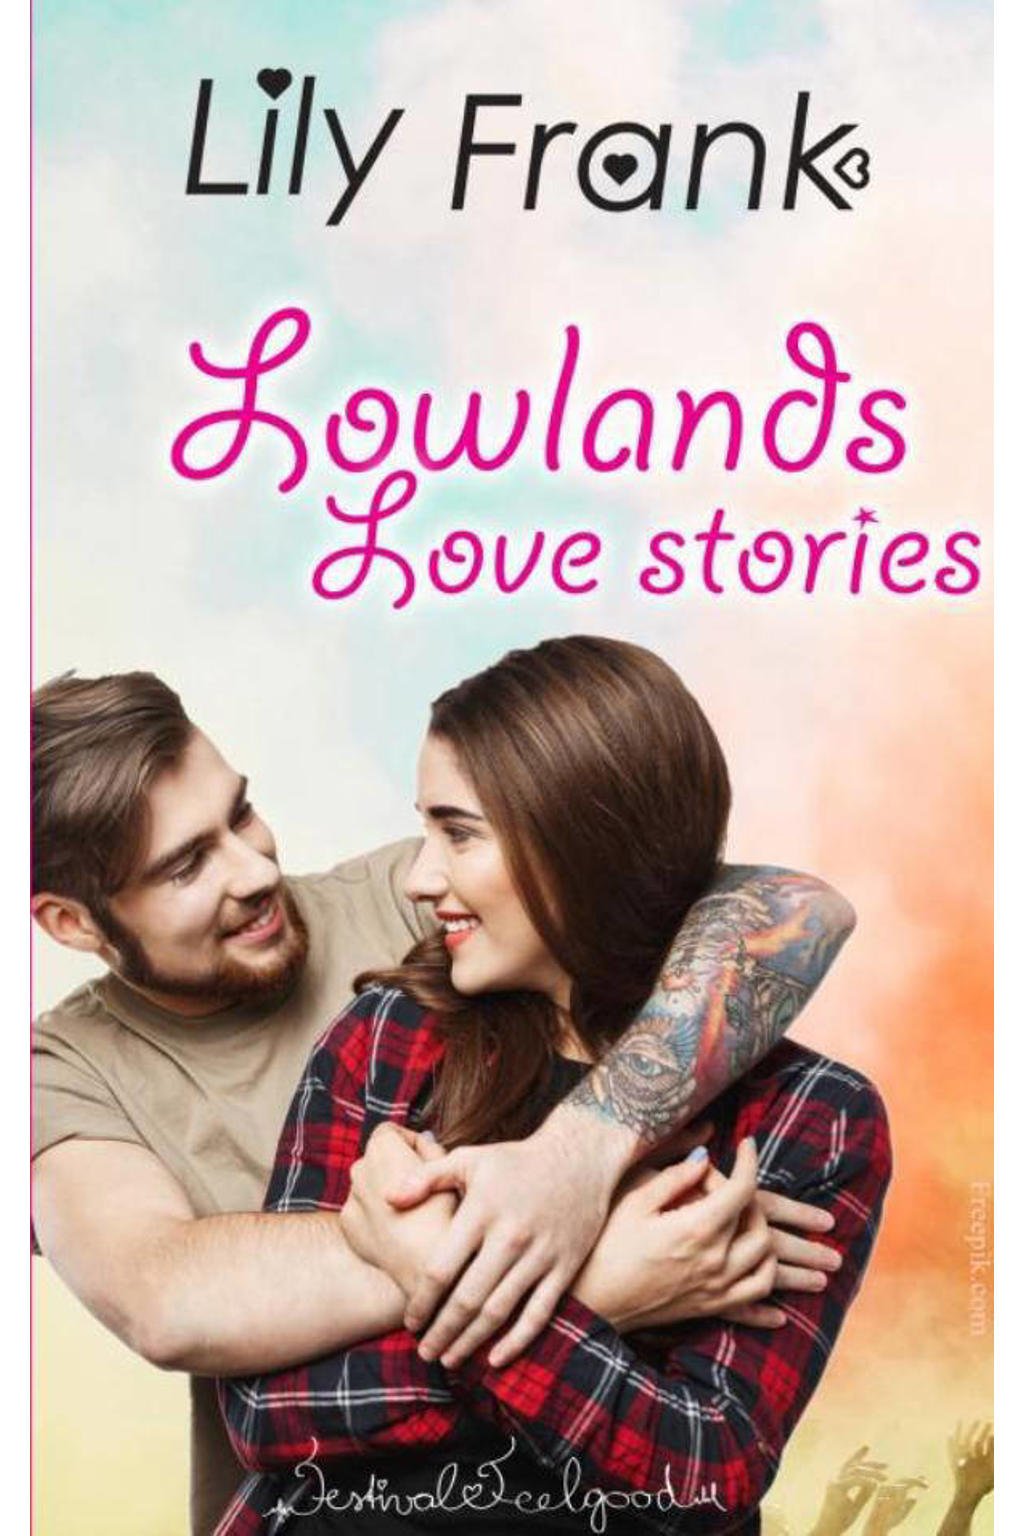 Lowlands love stories - Lily Frank